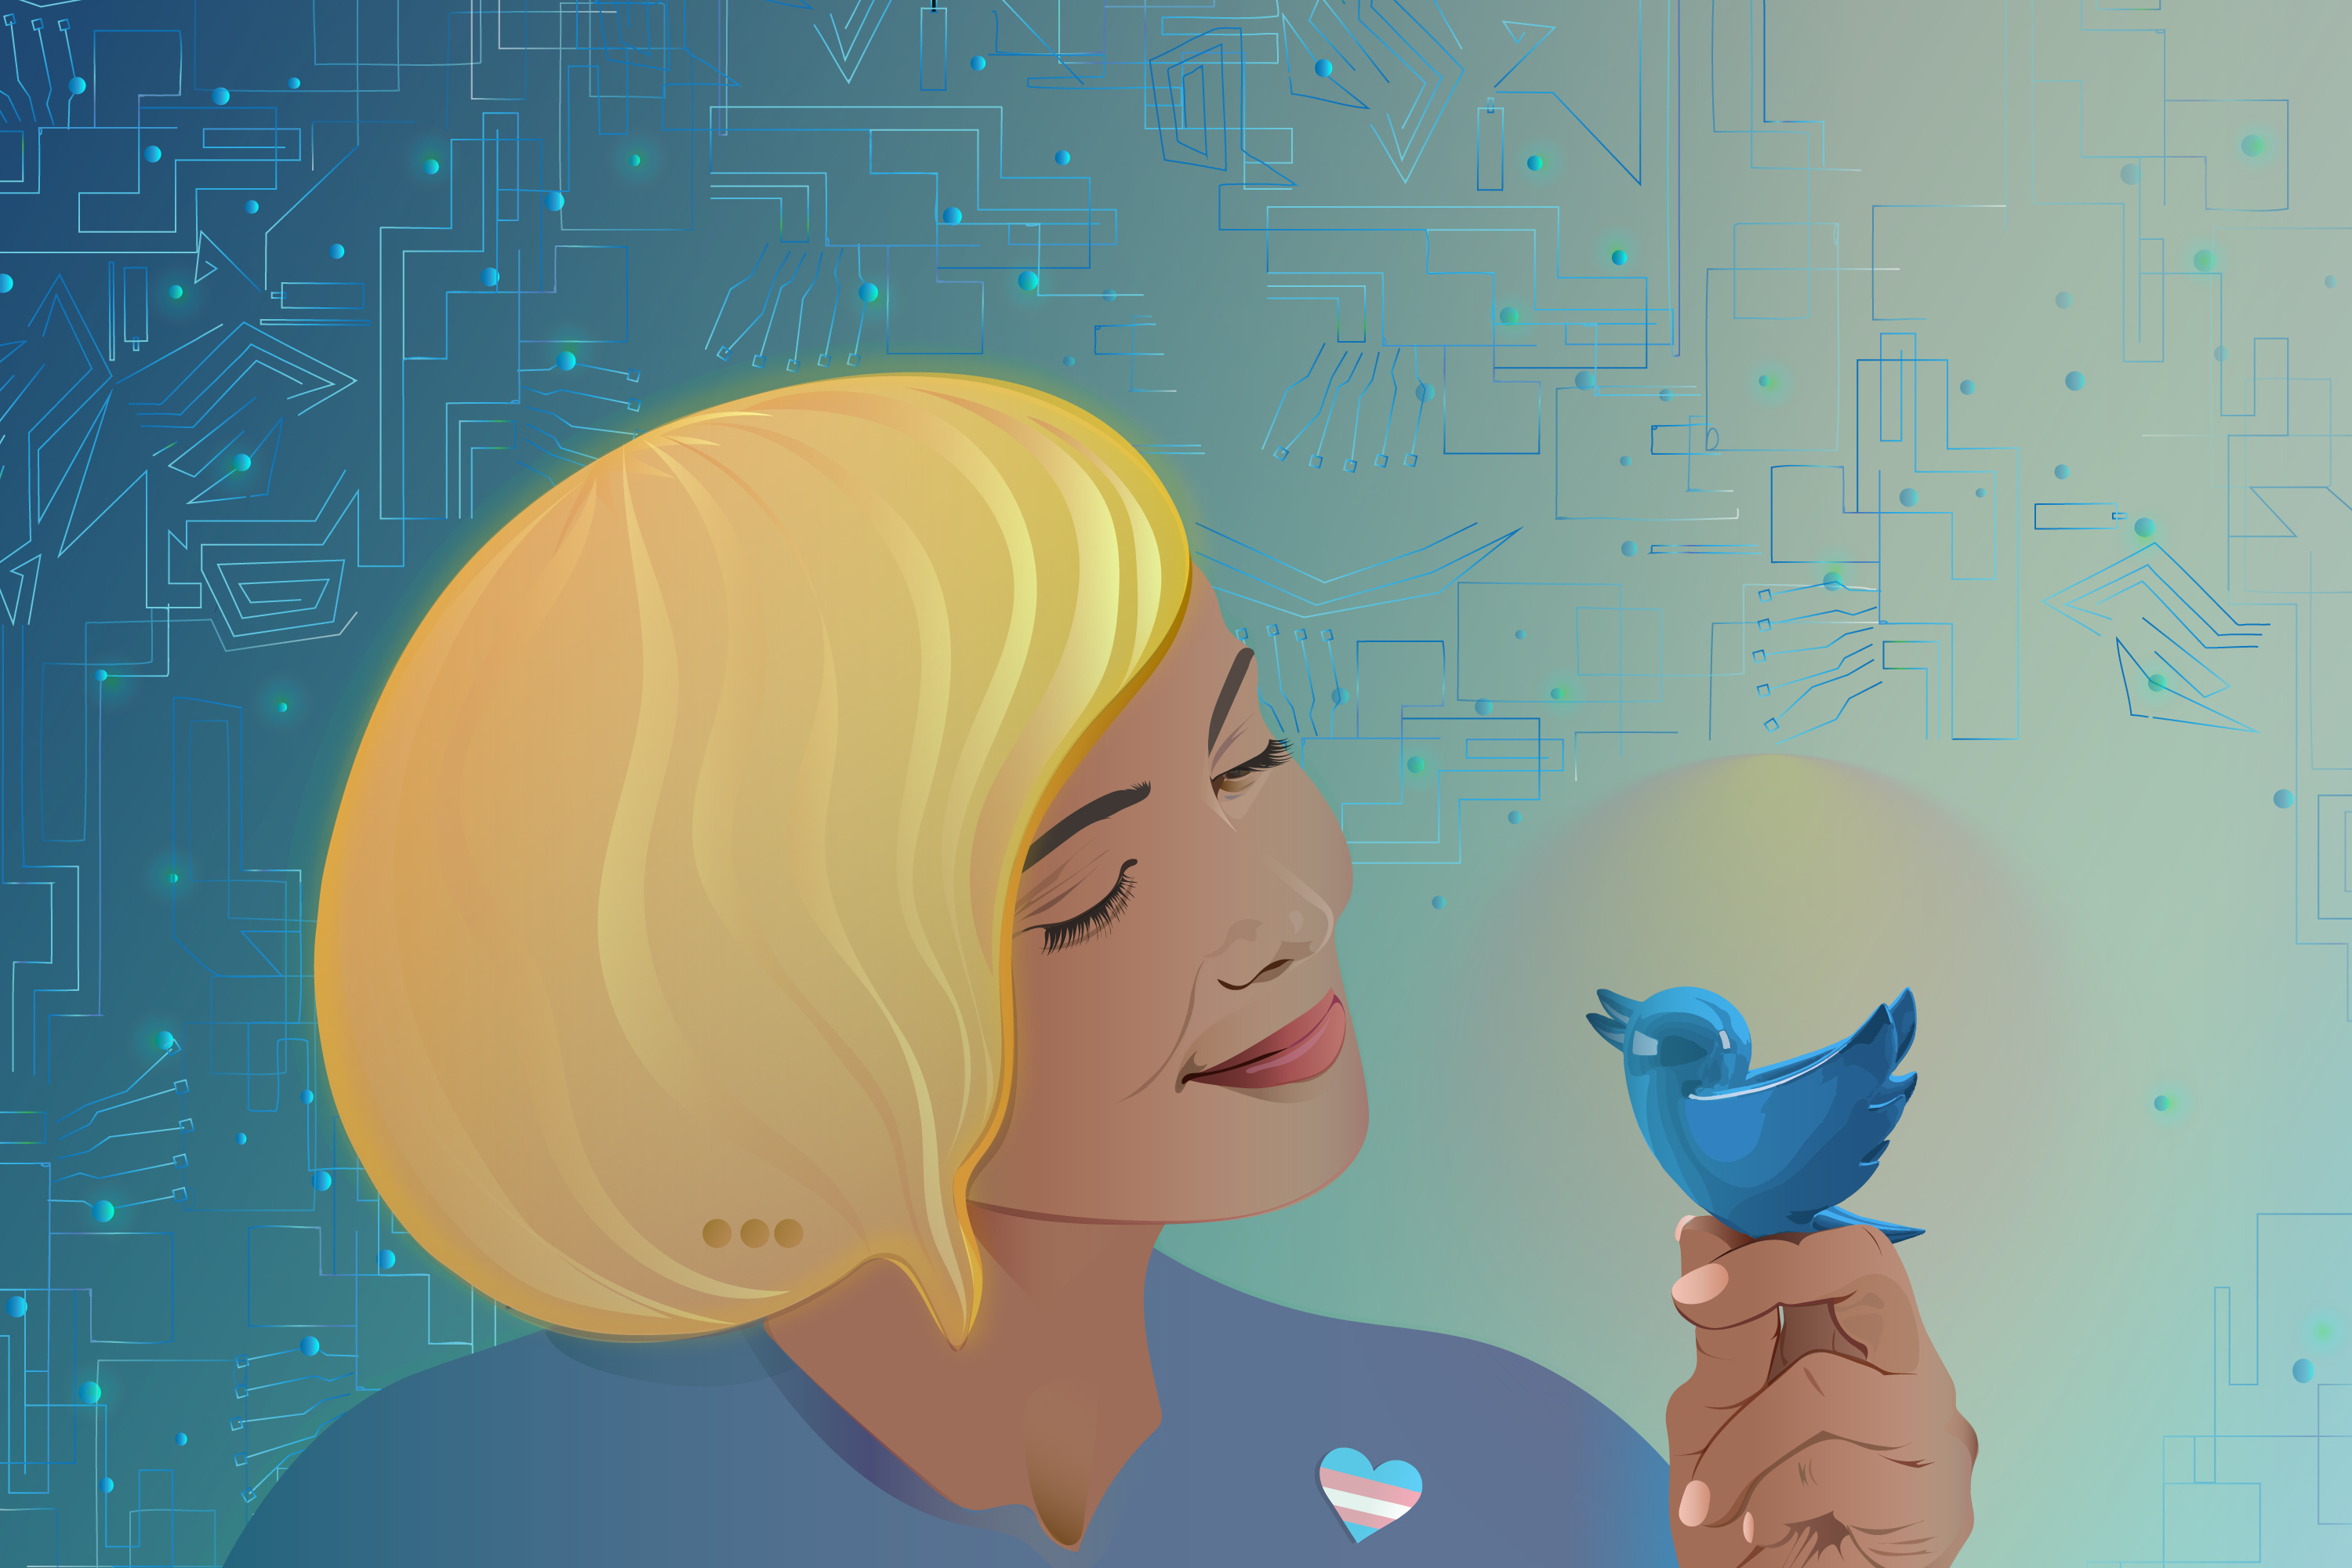 A drawing of a smiling person holding up and gazing toward a small blue bird that represents Twitter.